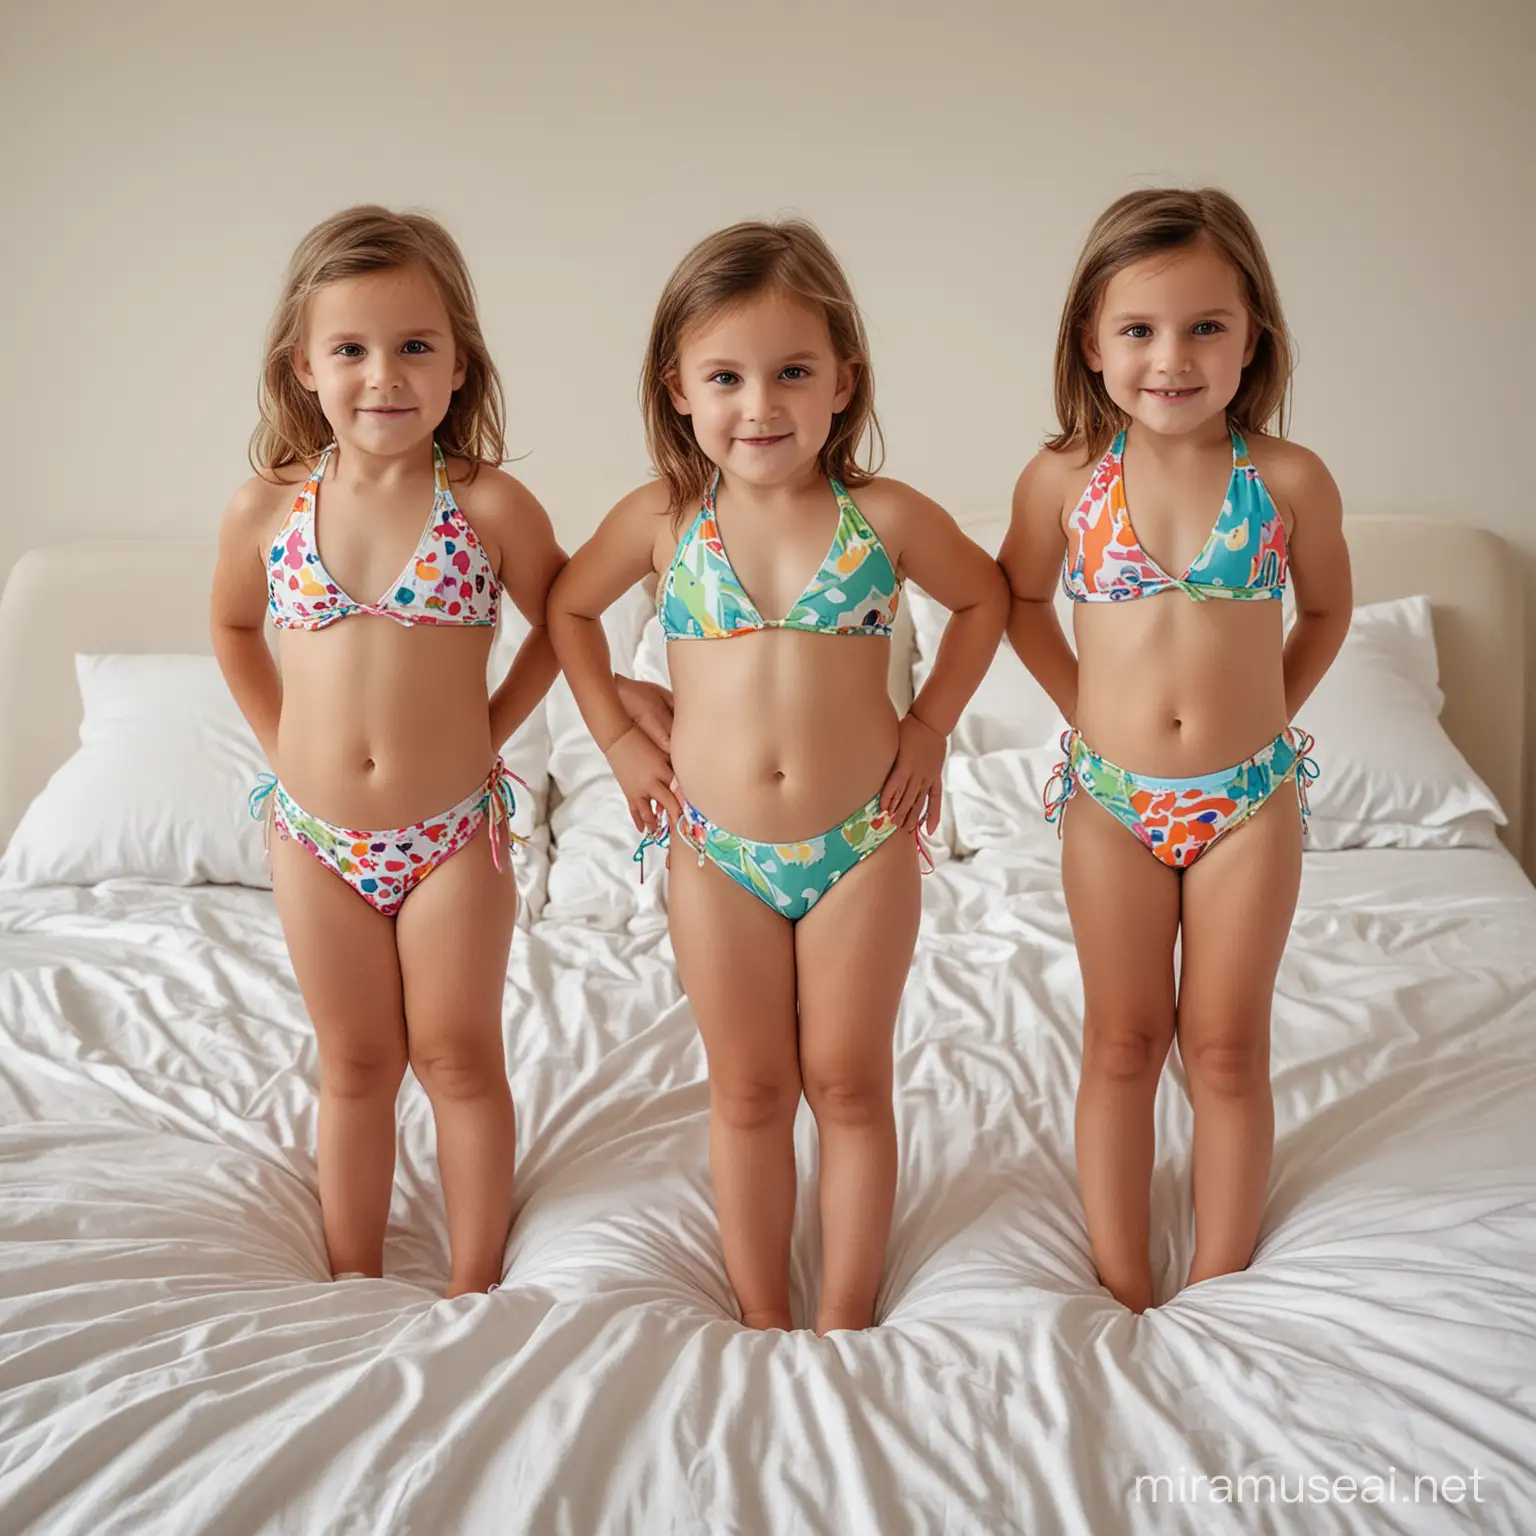 Young children wearing small string bikini bottoms on a bed